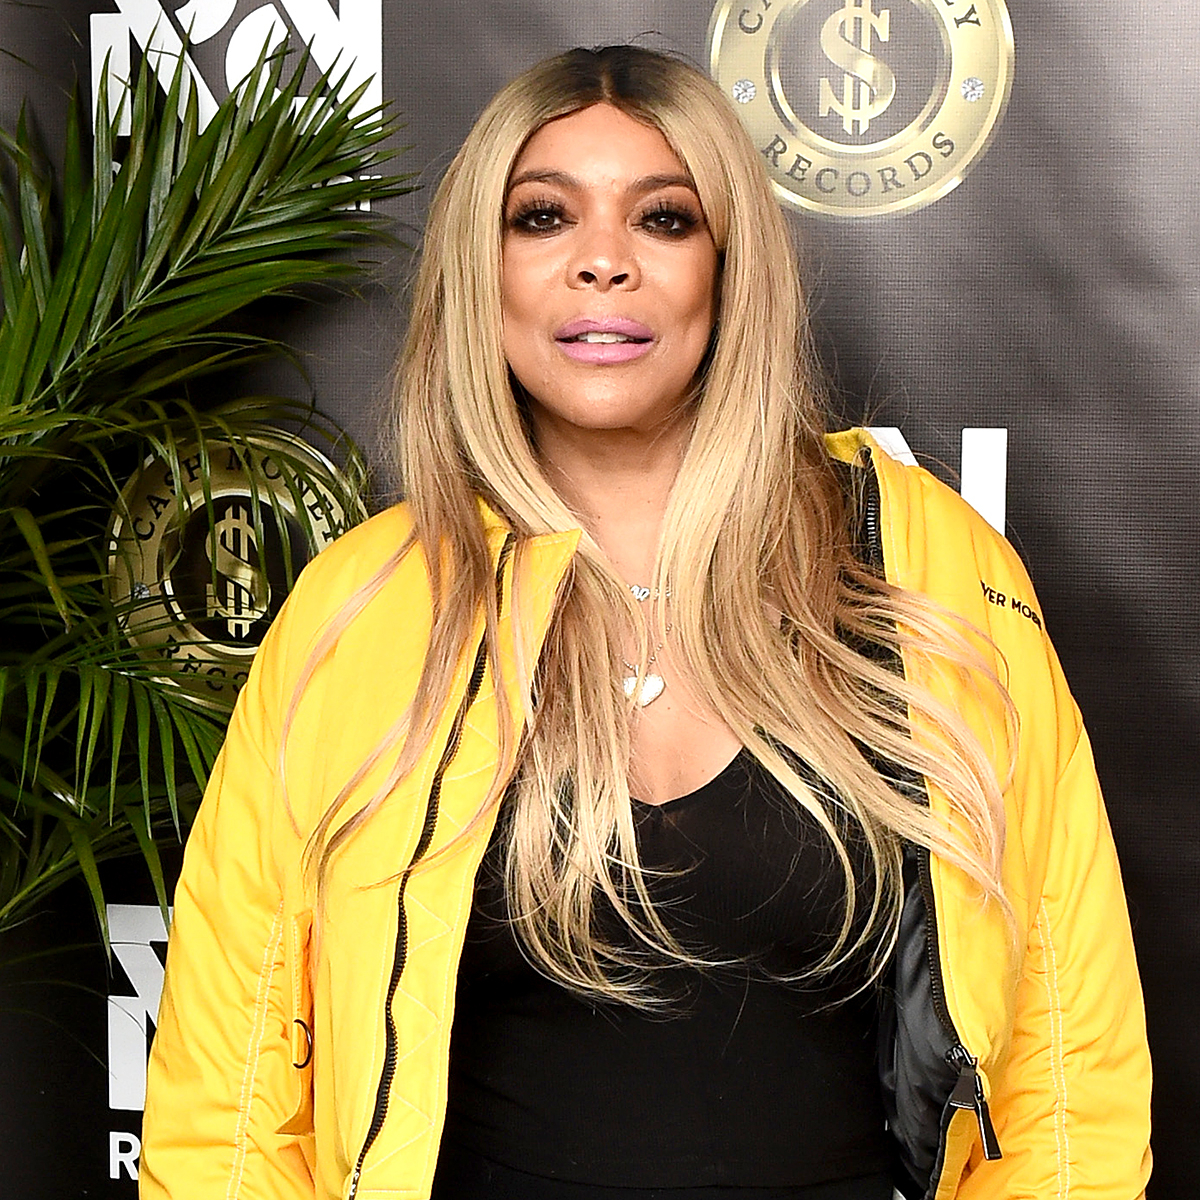 Wendy Williams’ 10 biggest bombs: what a mess!